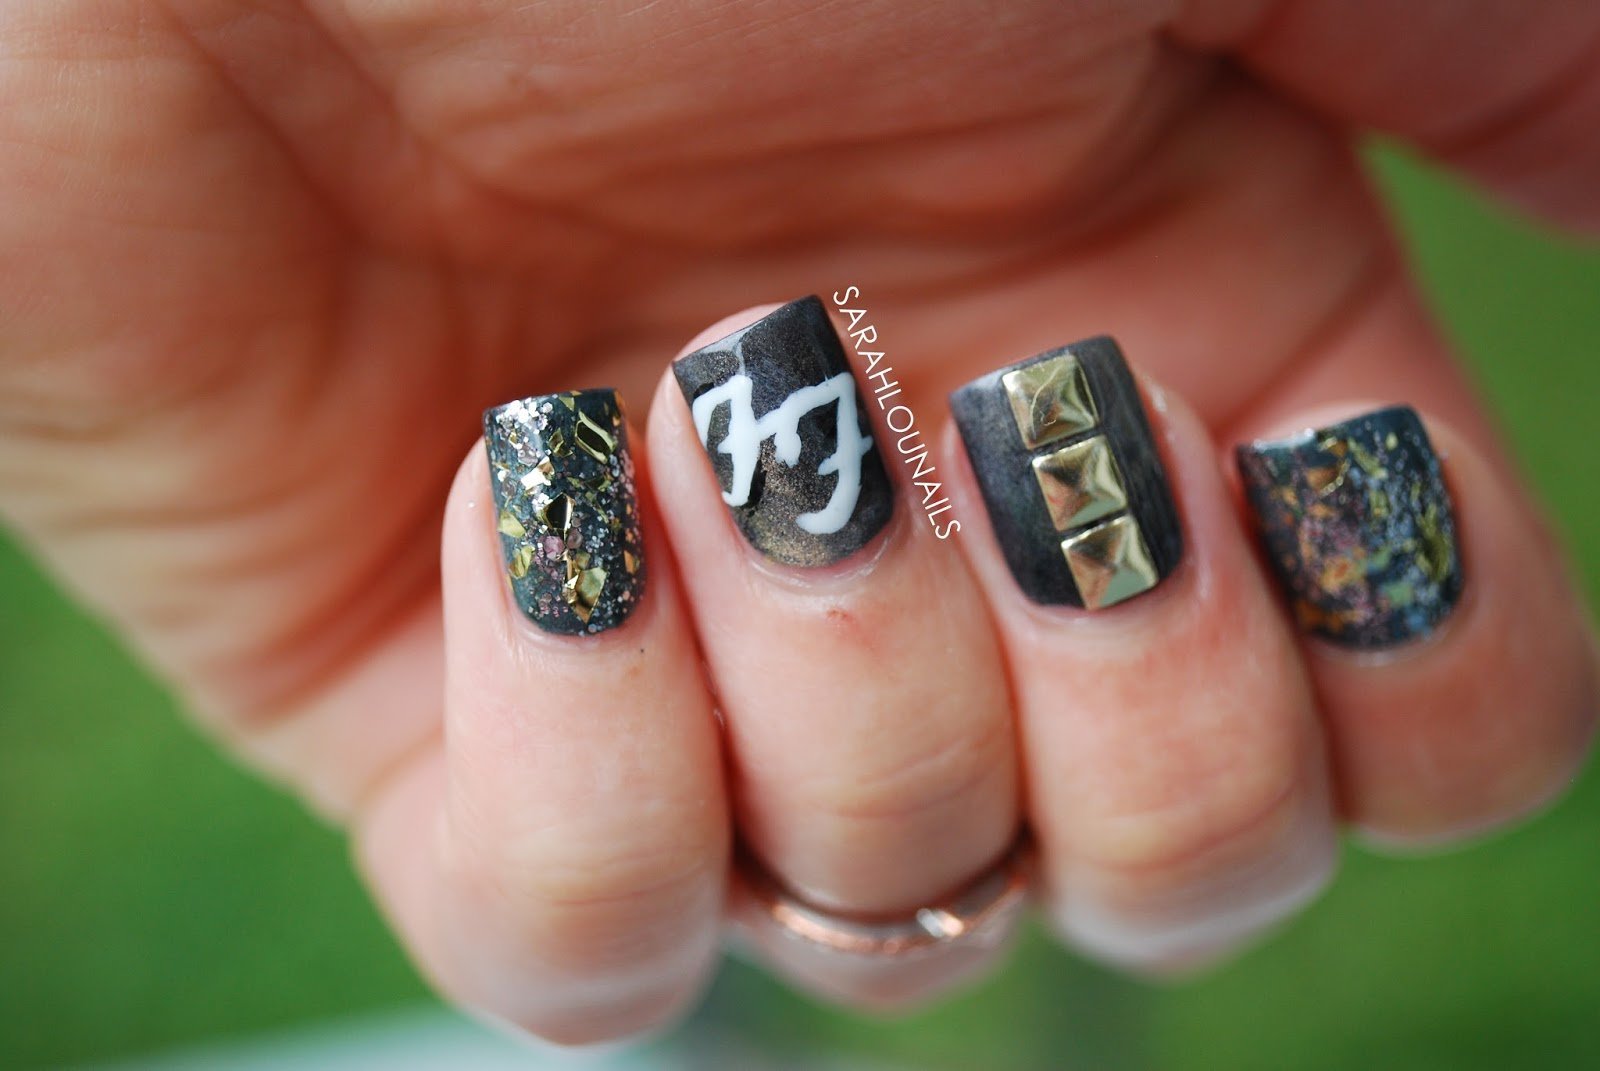 Foo Fighter's Nails 5 copy-1